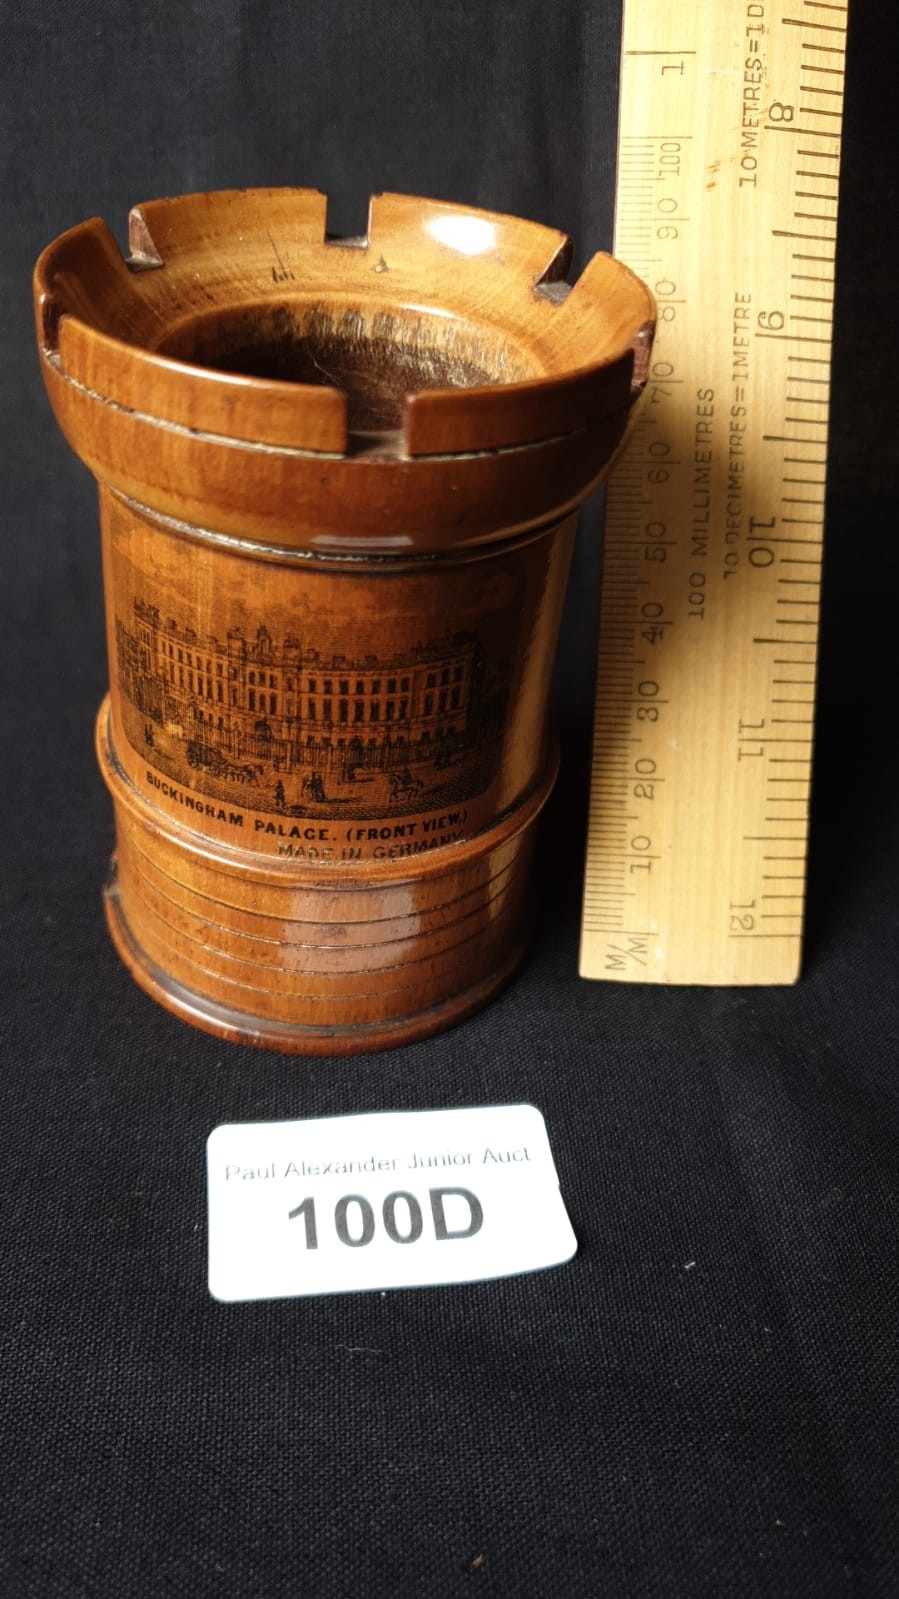 Rare Mauchline ware pen / pencil holder buckingham palace front view.